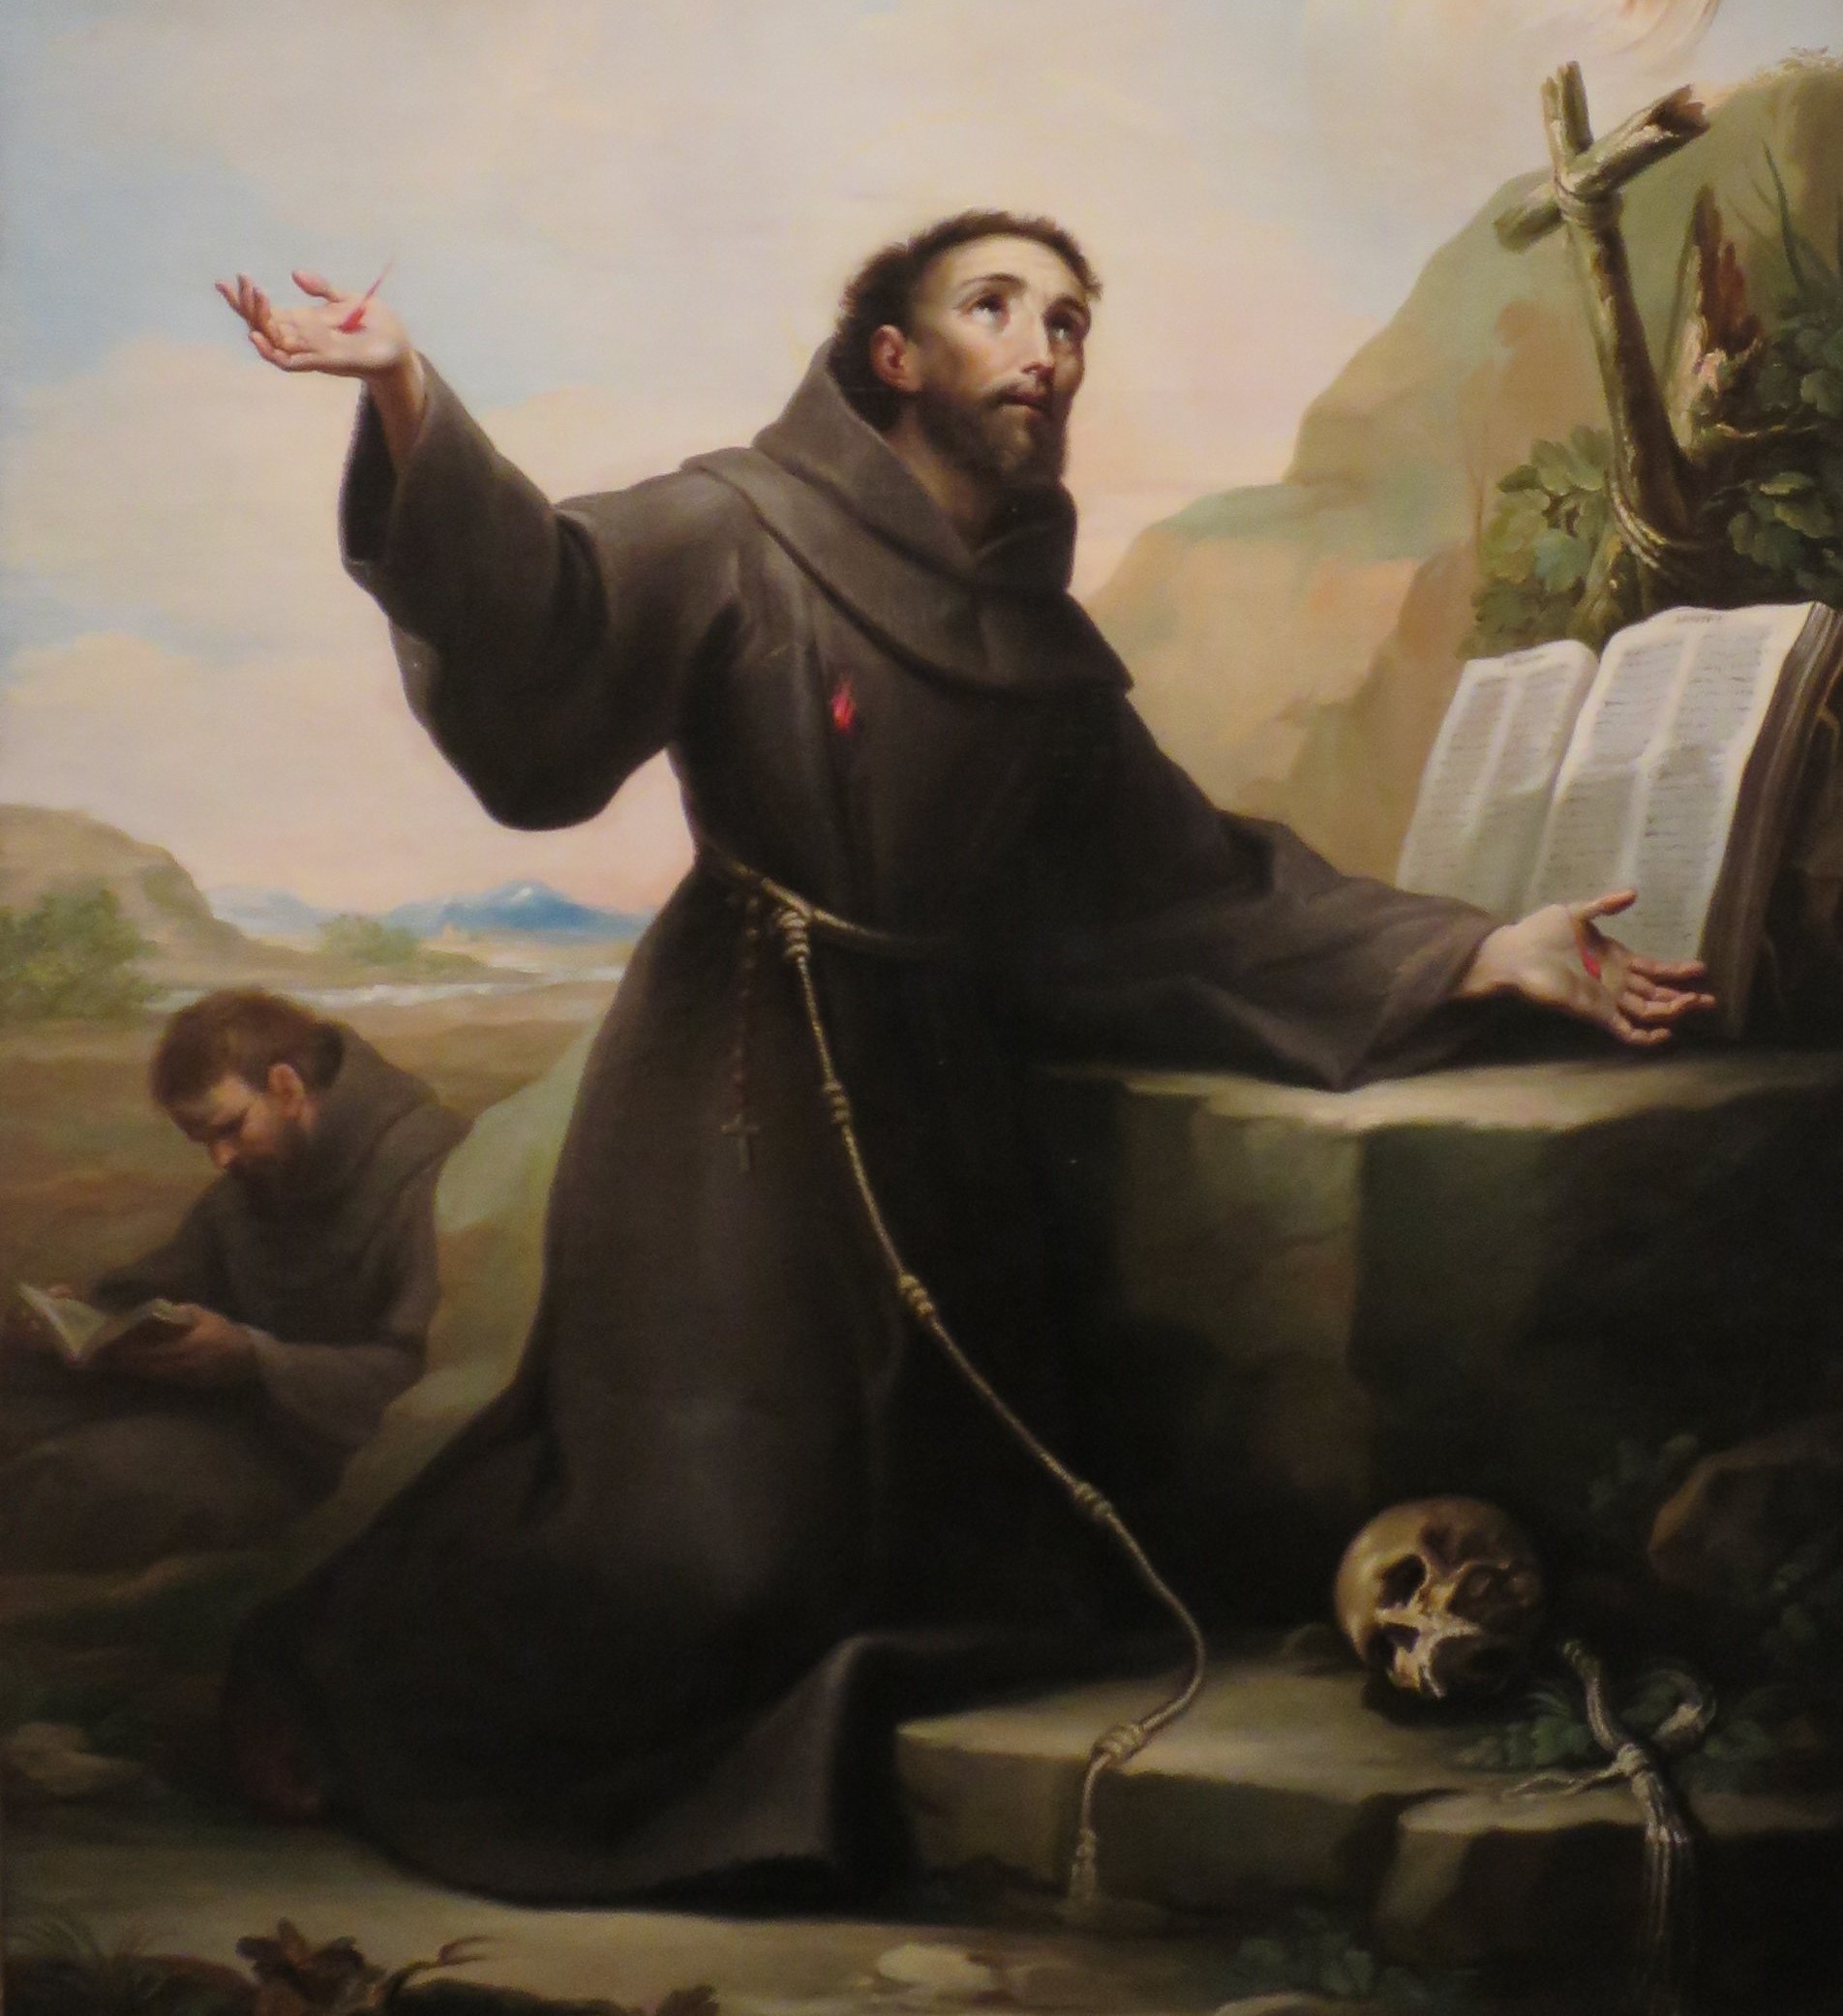 Many fine histories exist on the life of St. Francis of Assisi so there is ...